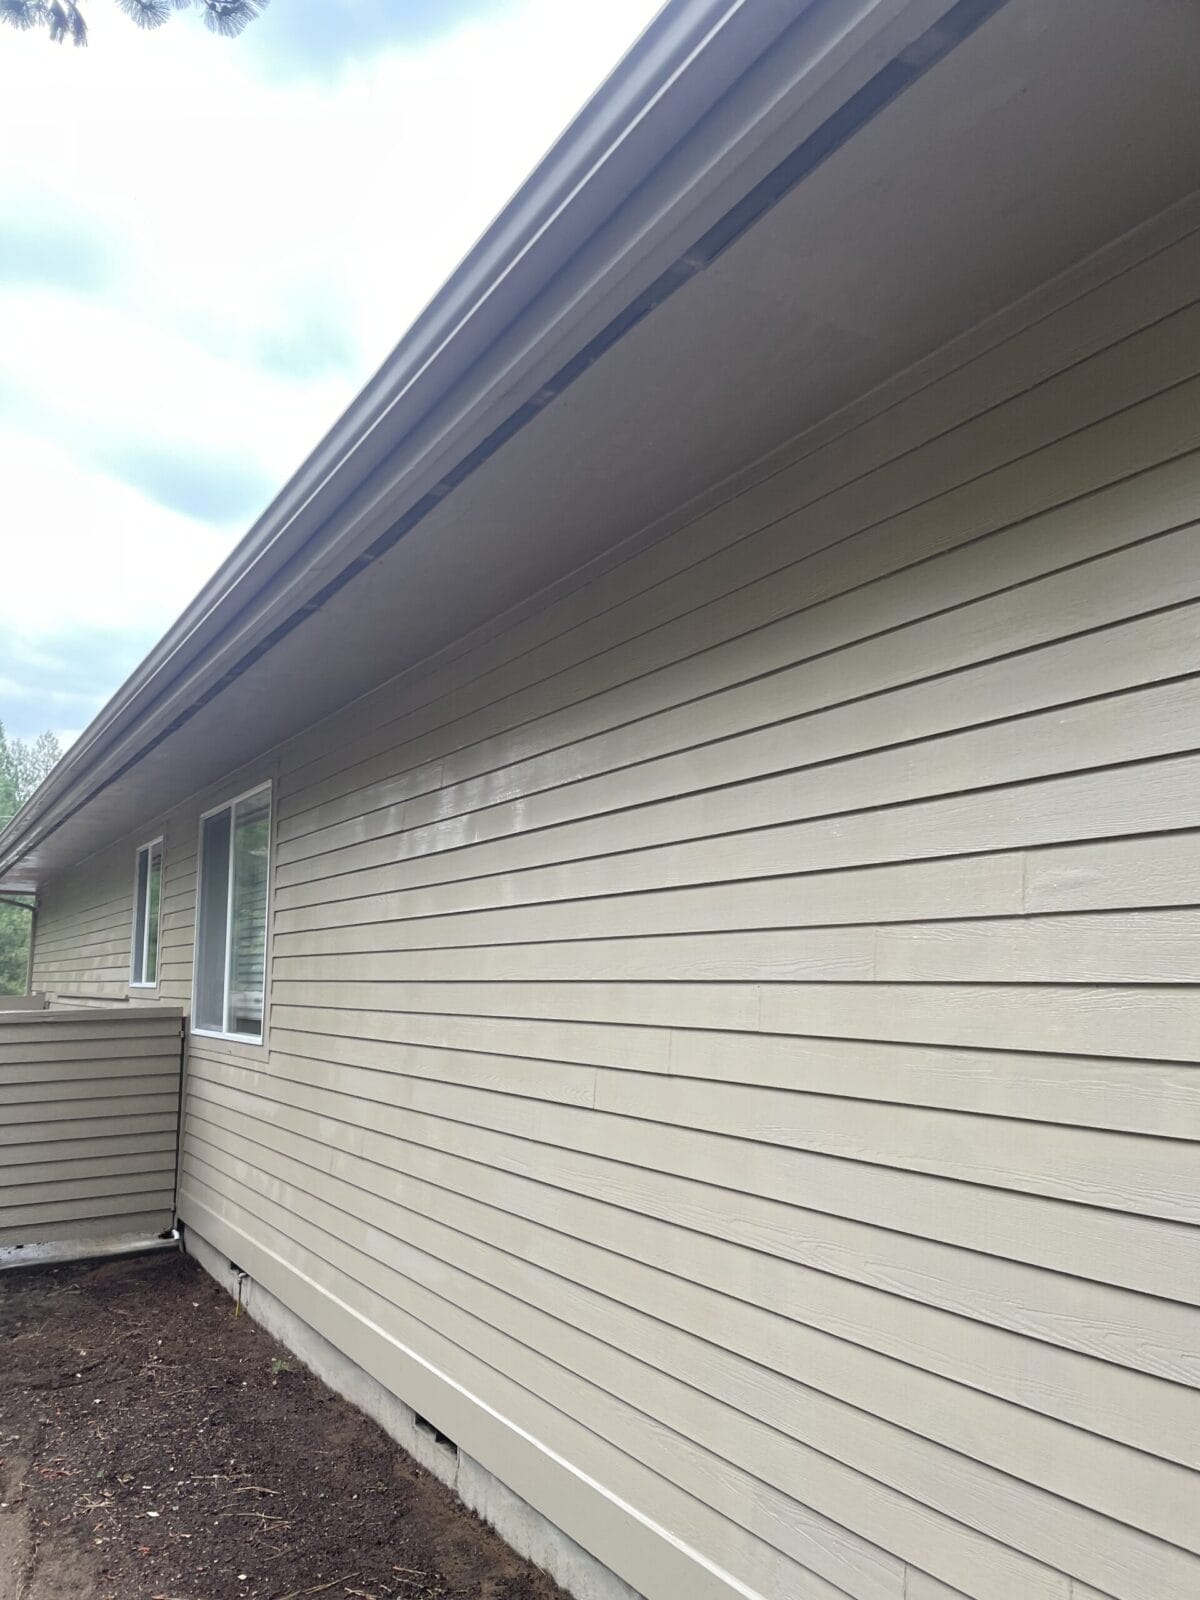 Siding of home cleaned